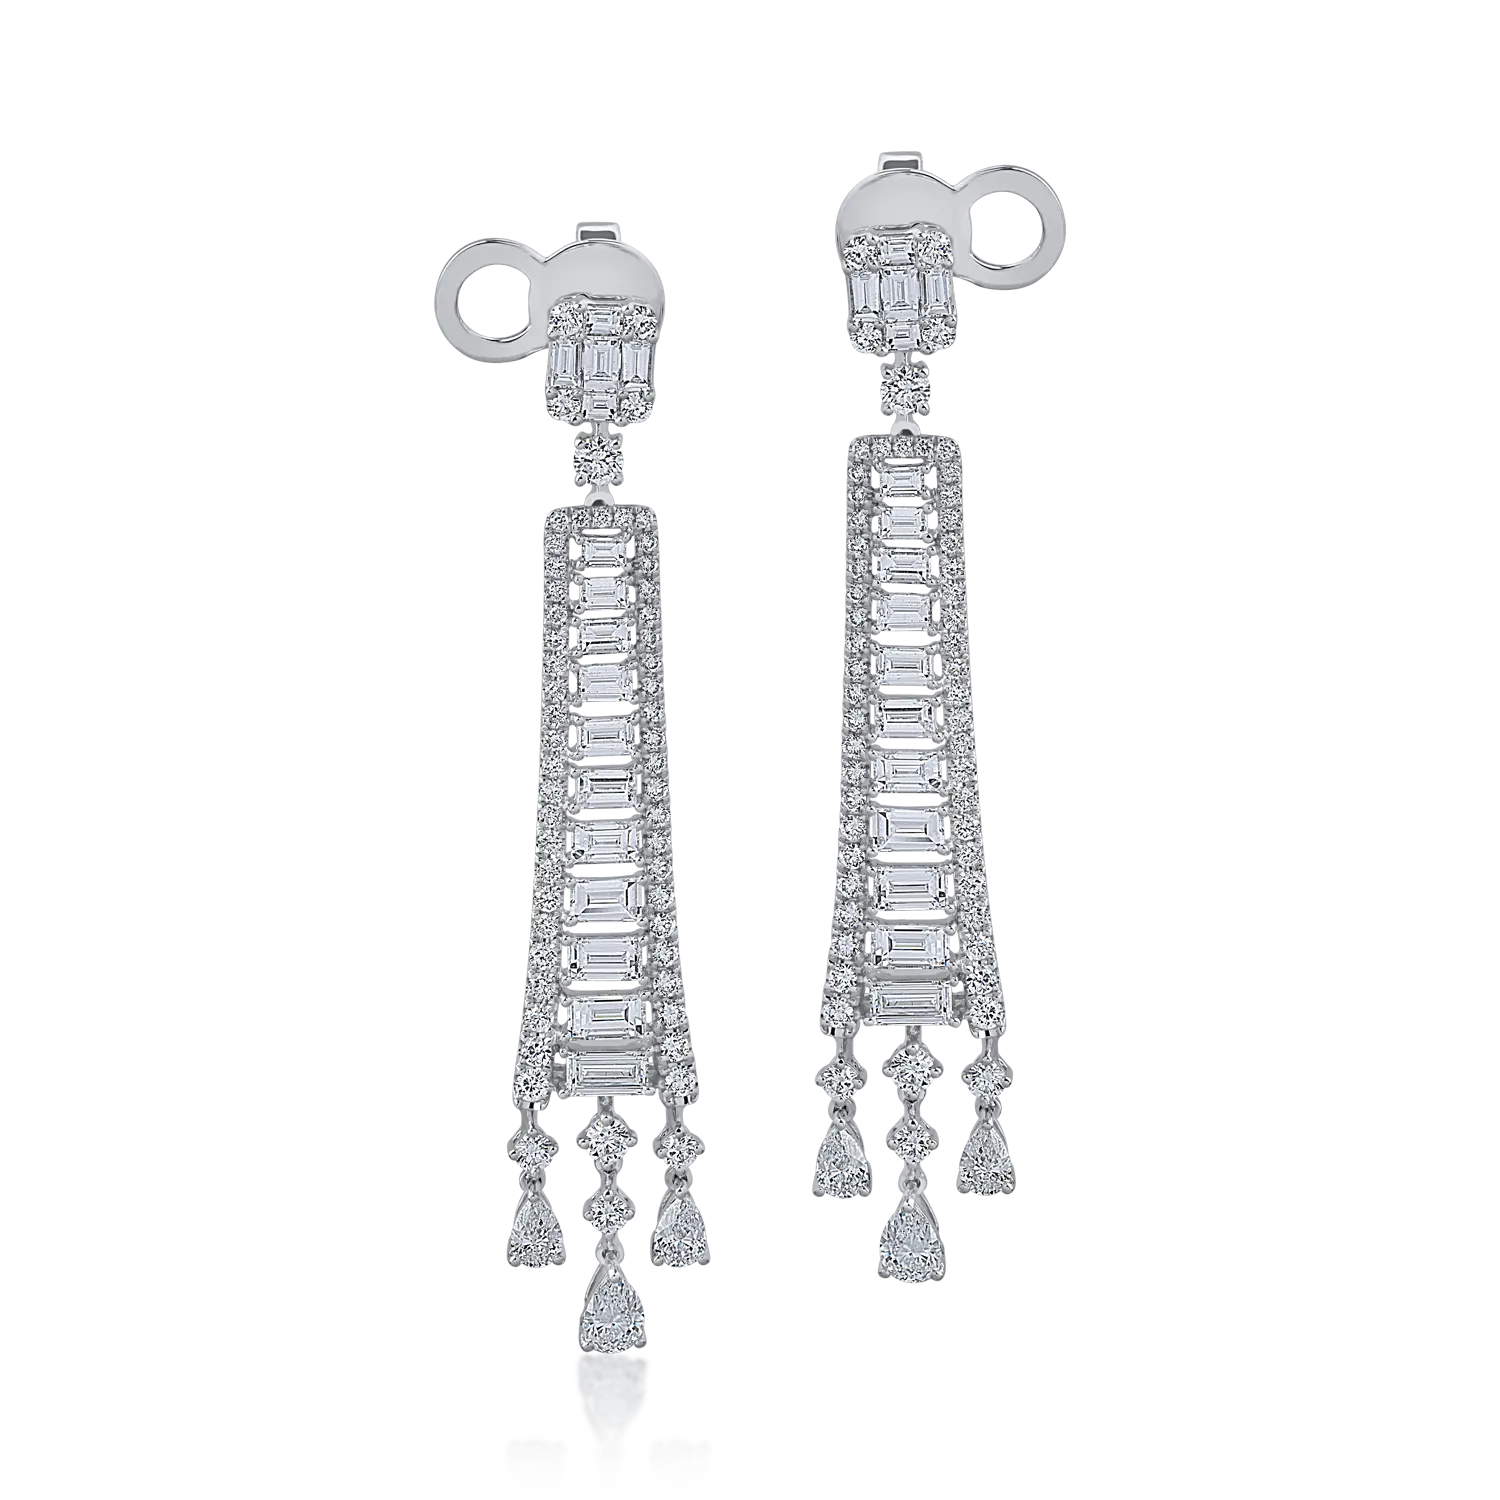 White gold earrings with 5.28ct diamonds